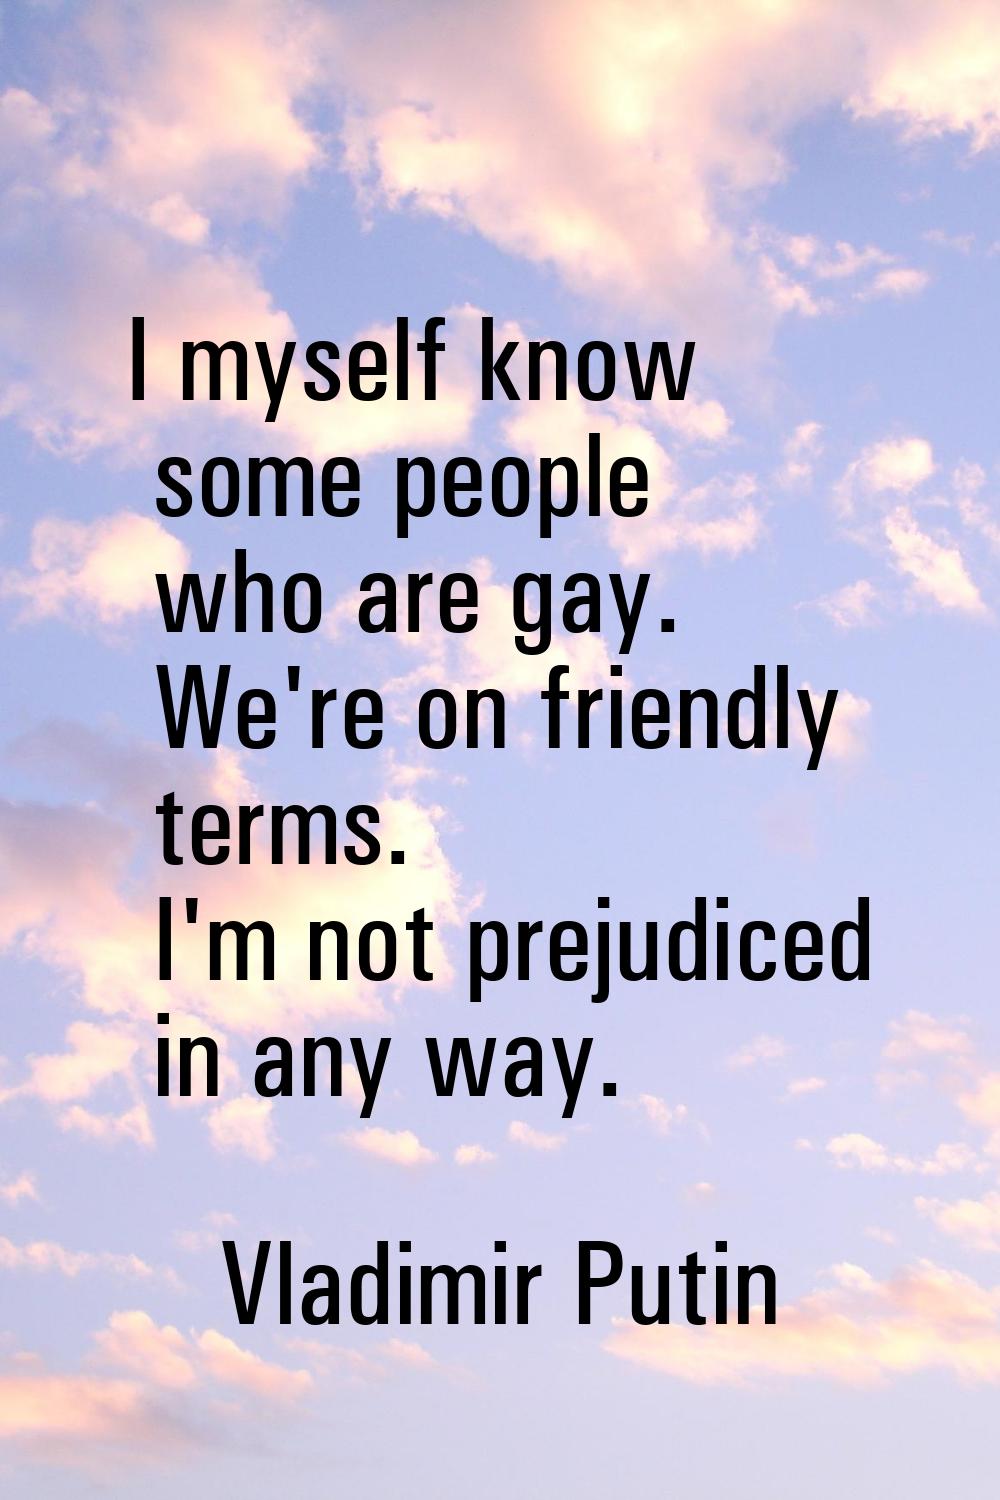 I myself know some people who are gay. We're on friendly terms. I'm not prejudiced in any way.